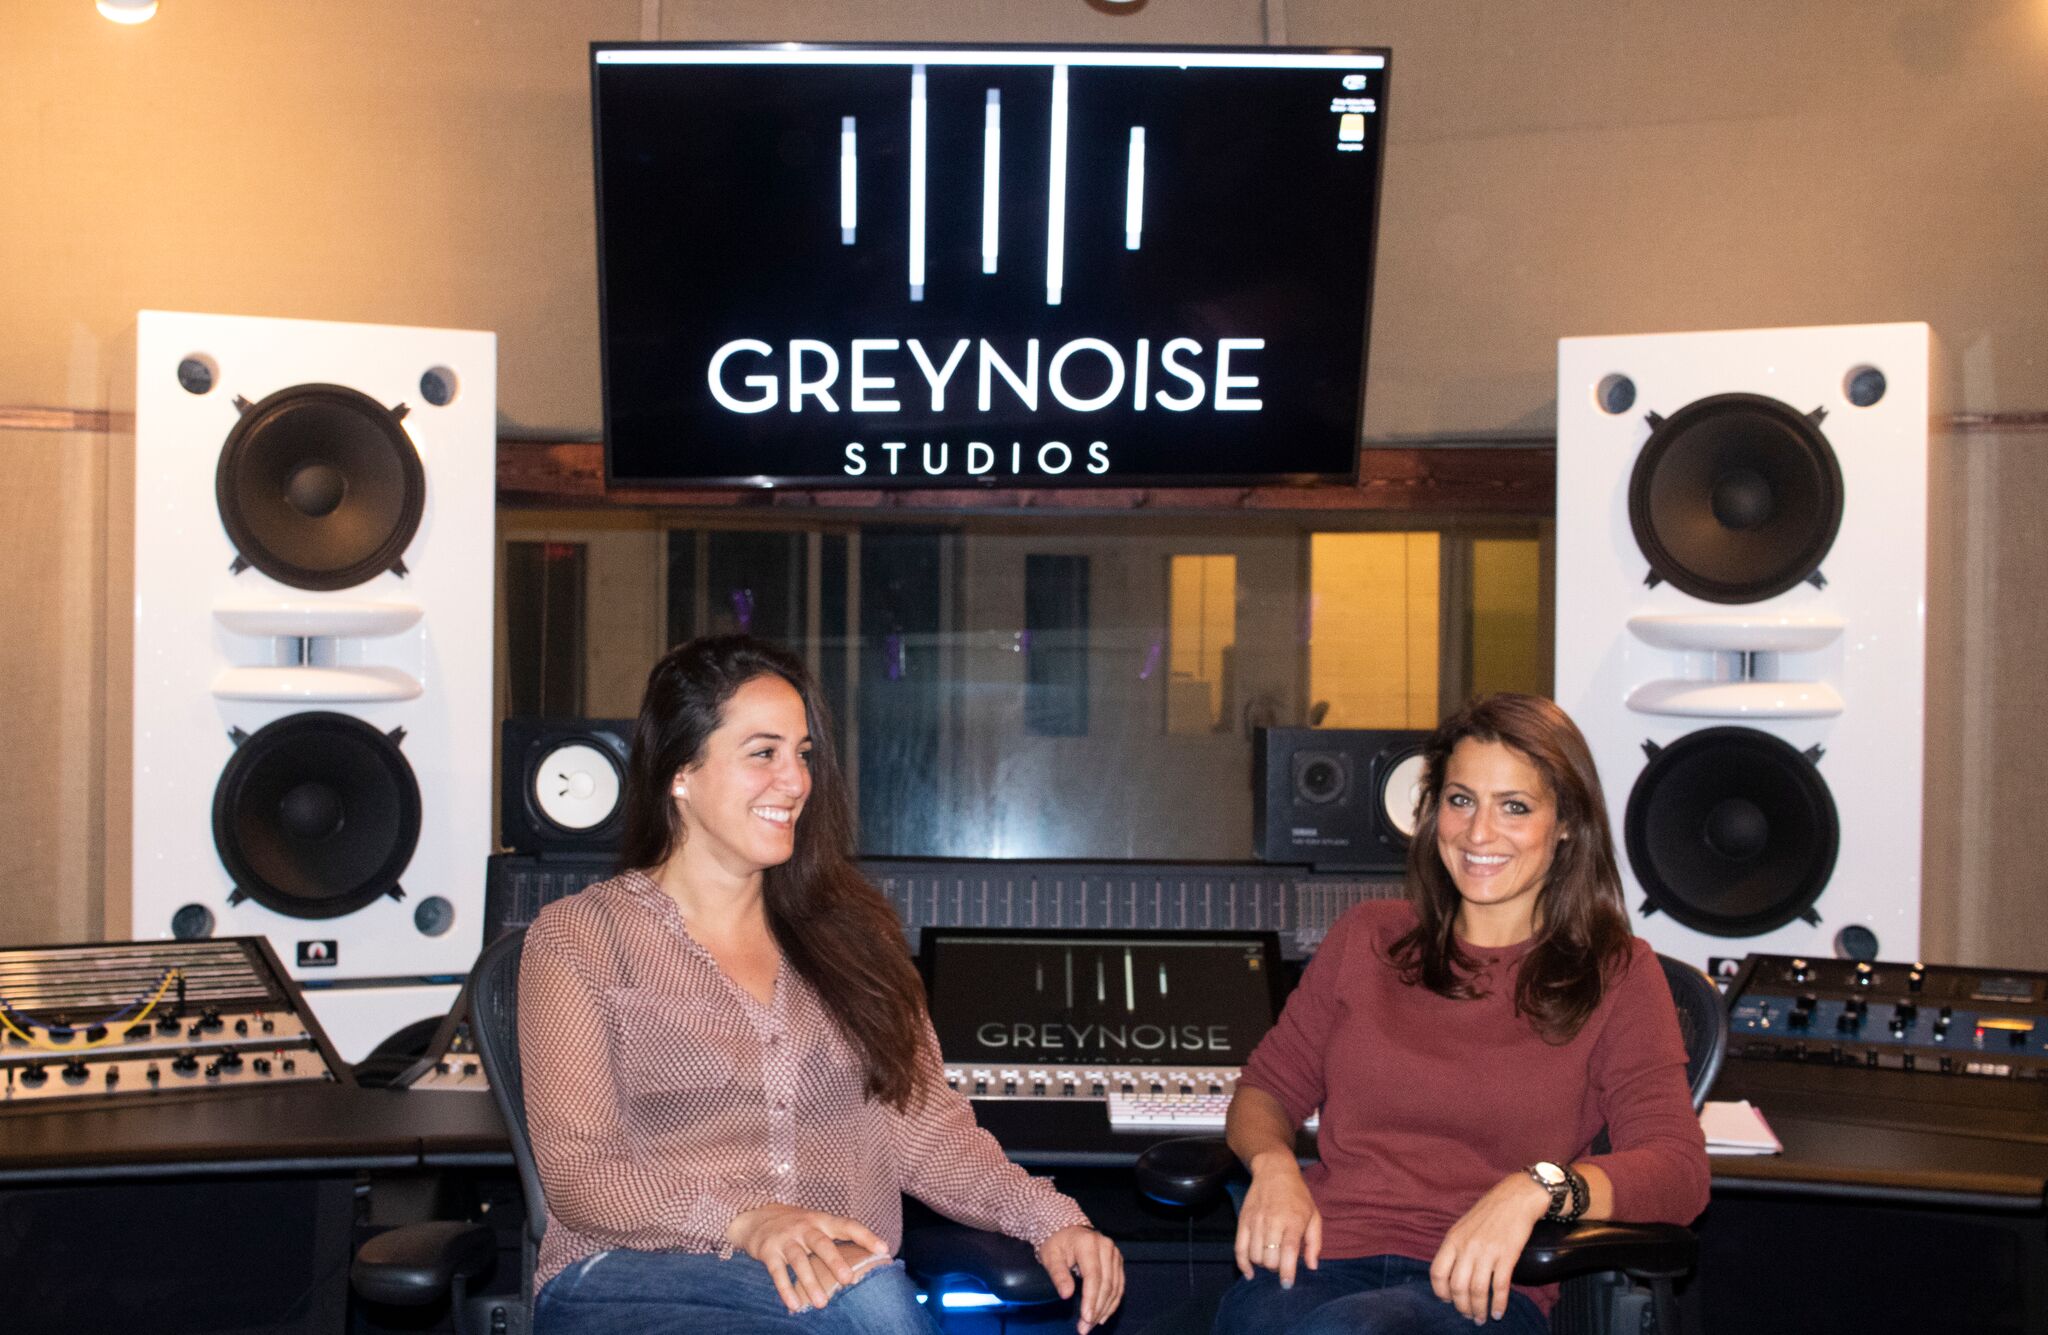 Genesys Black G32 is the Console of Choice for Grey Noise Studios